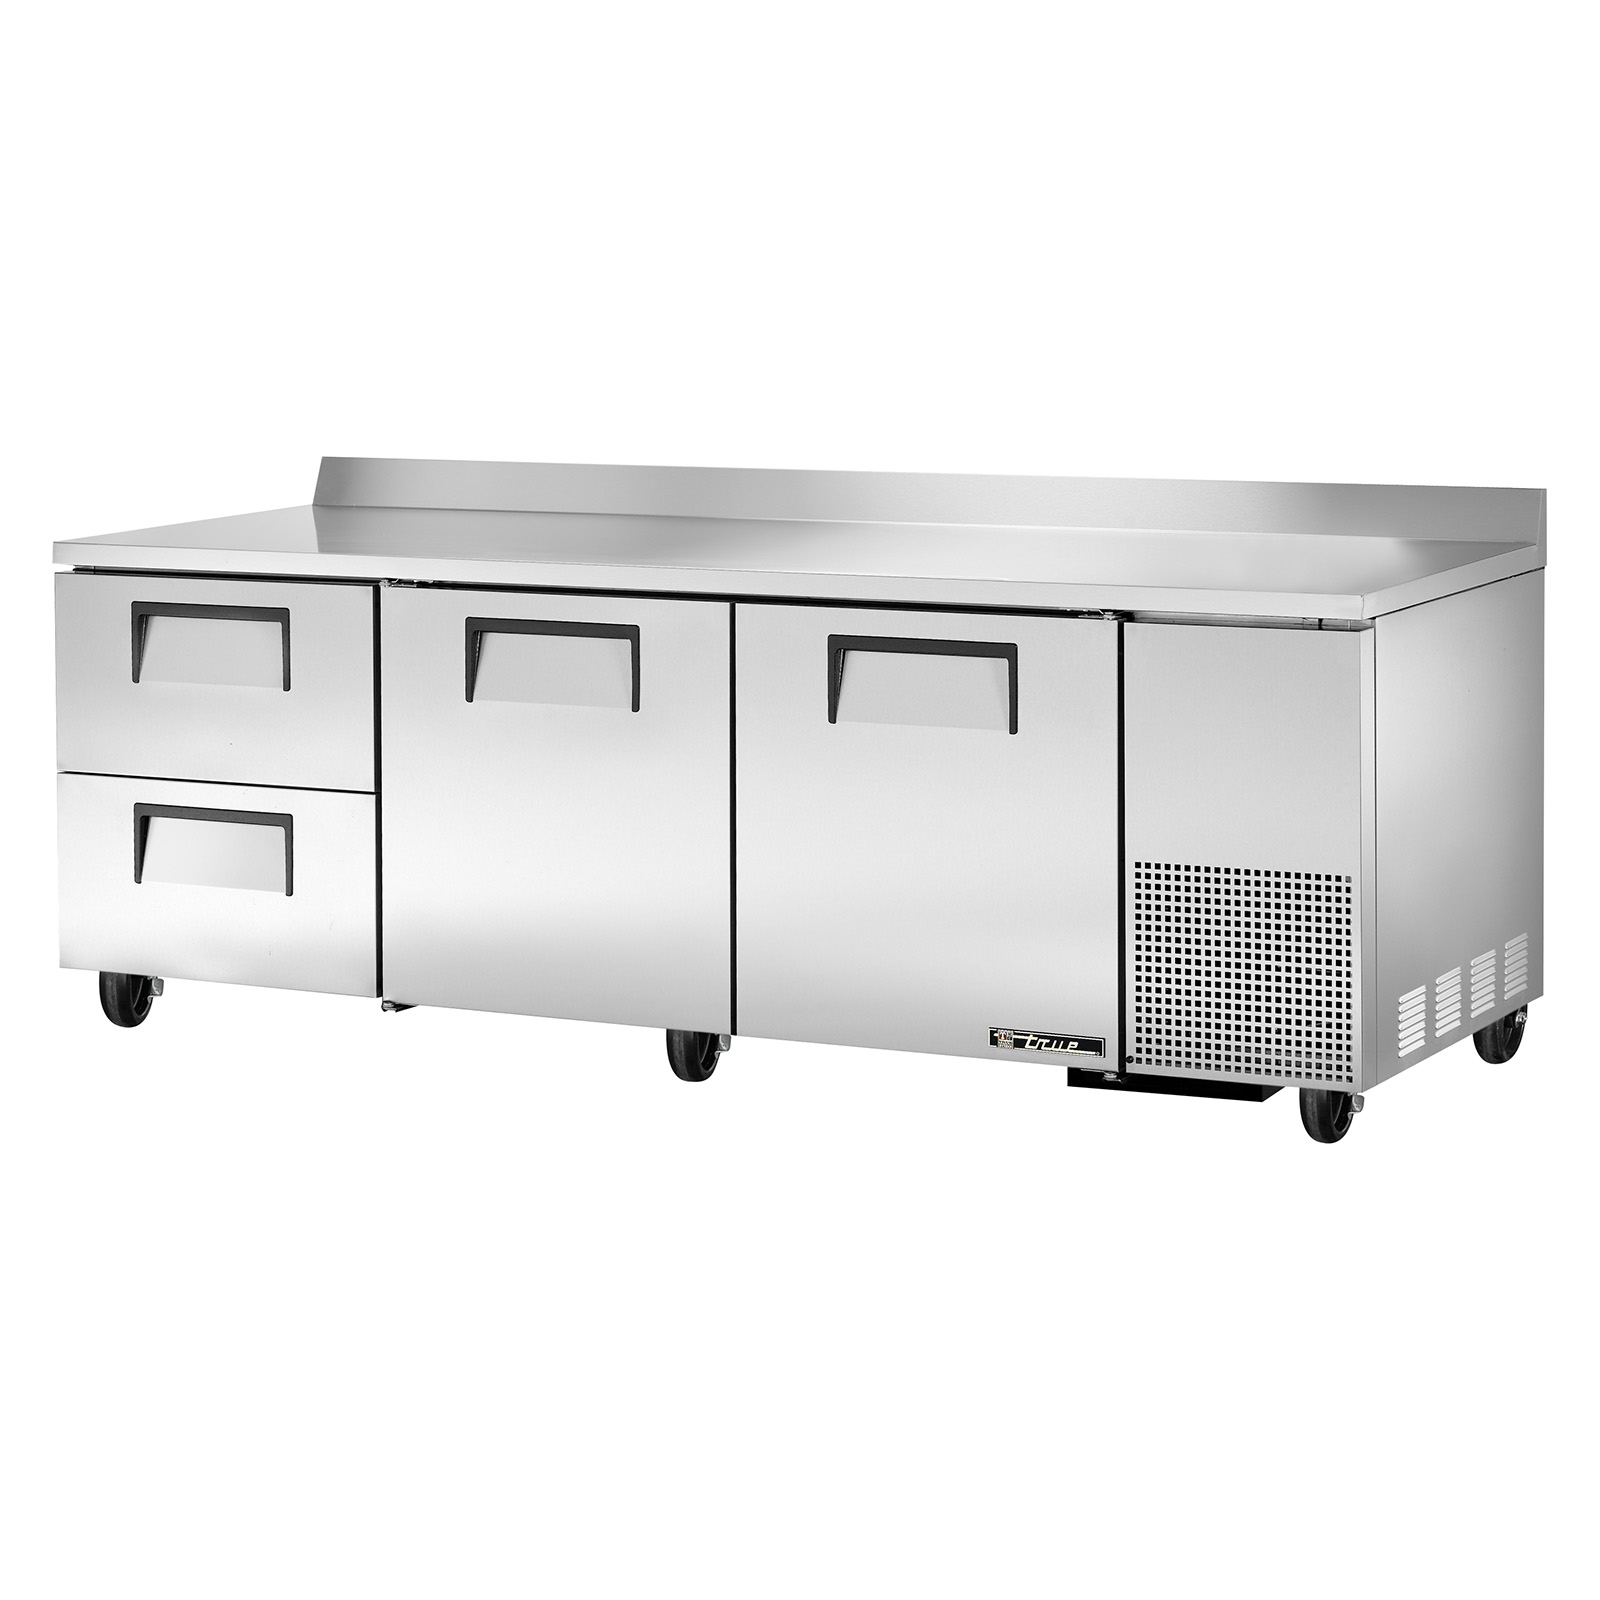 True Food Service Equipment TWT-93D-2 Refrigerated Counter, Work Top